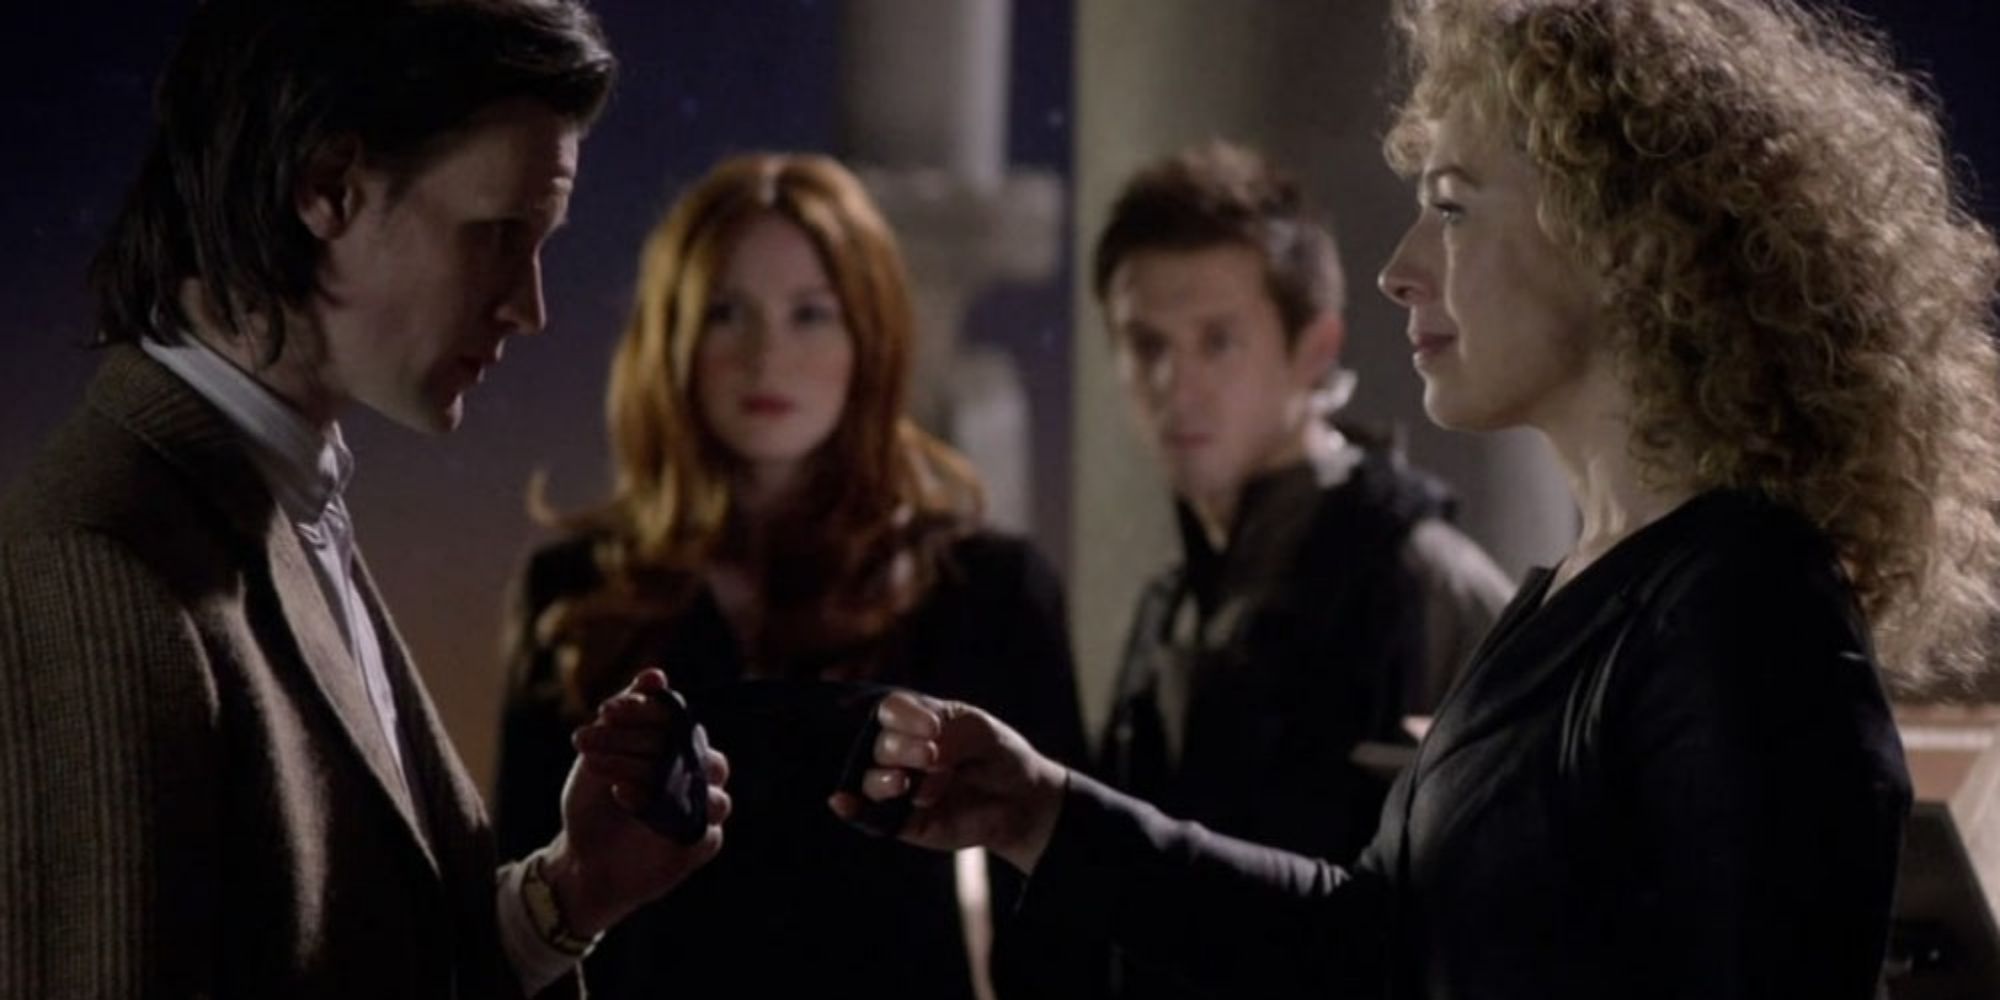 Official image of The Wedding of River Song, an episode from TV show Doctor Who.